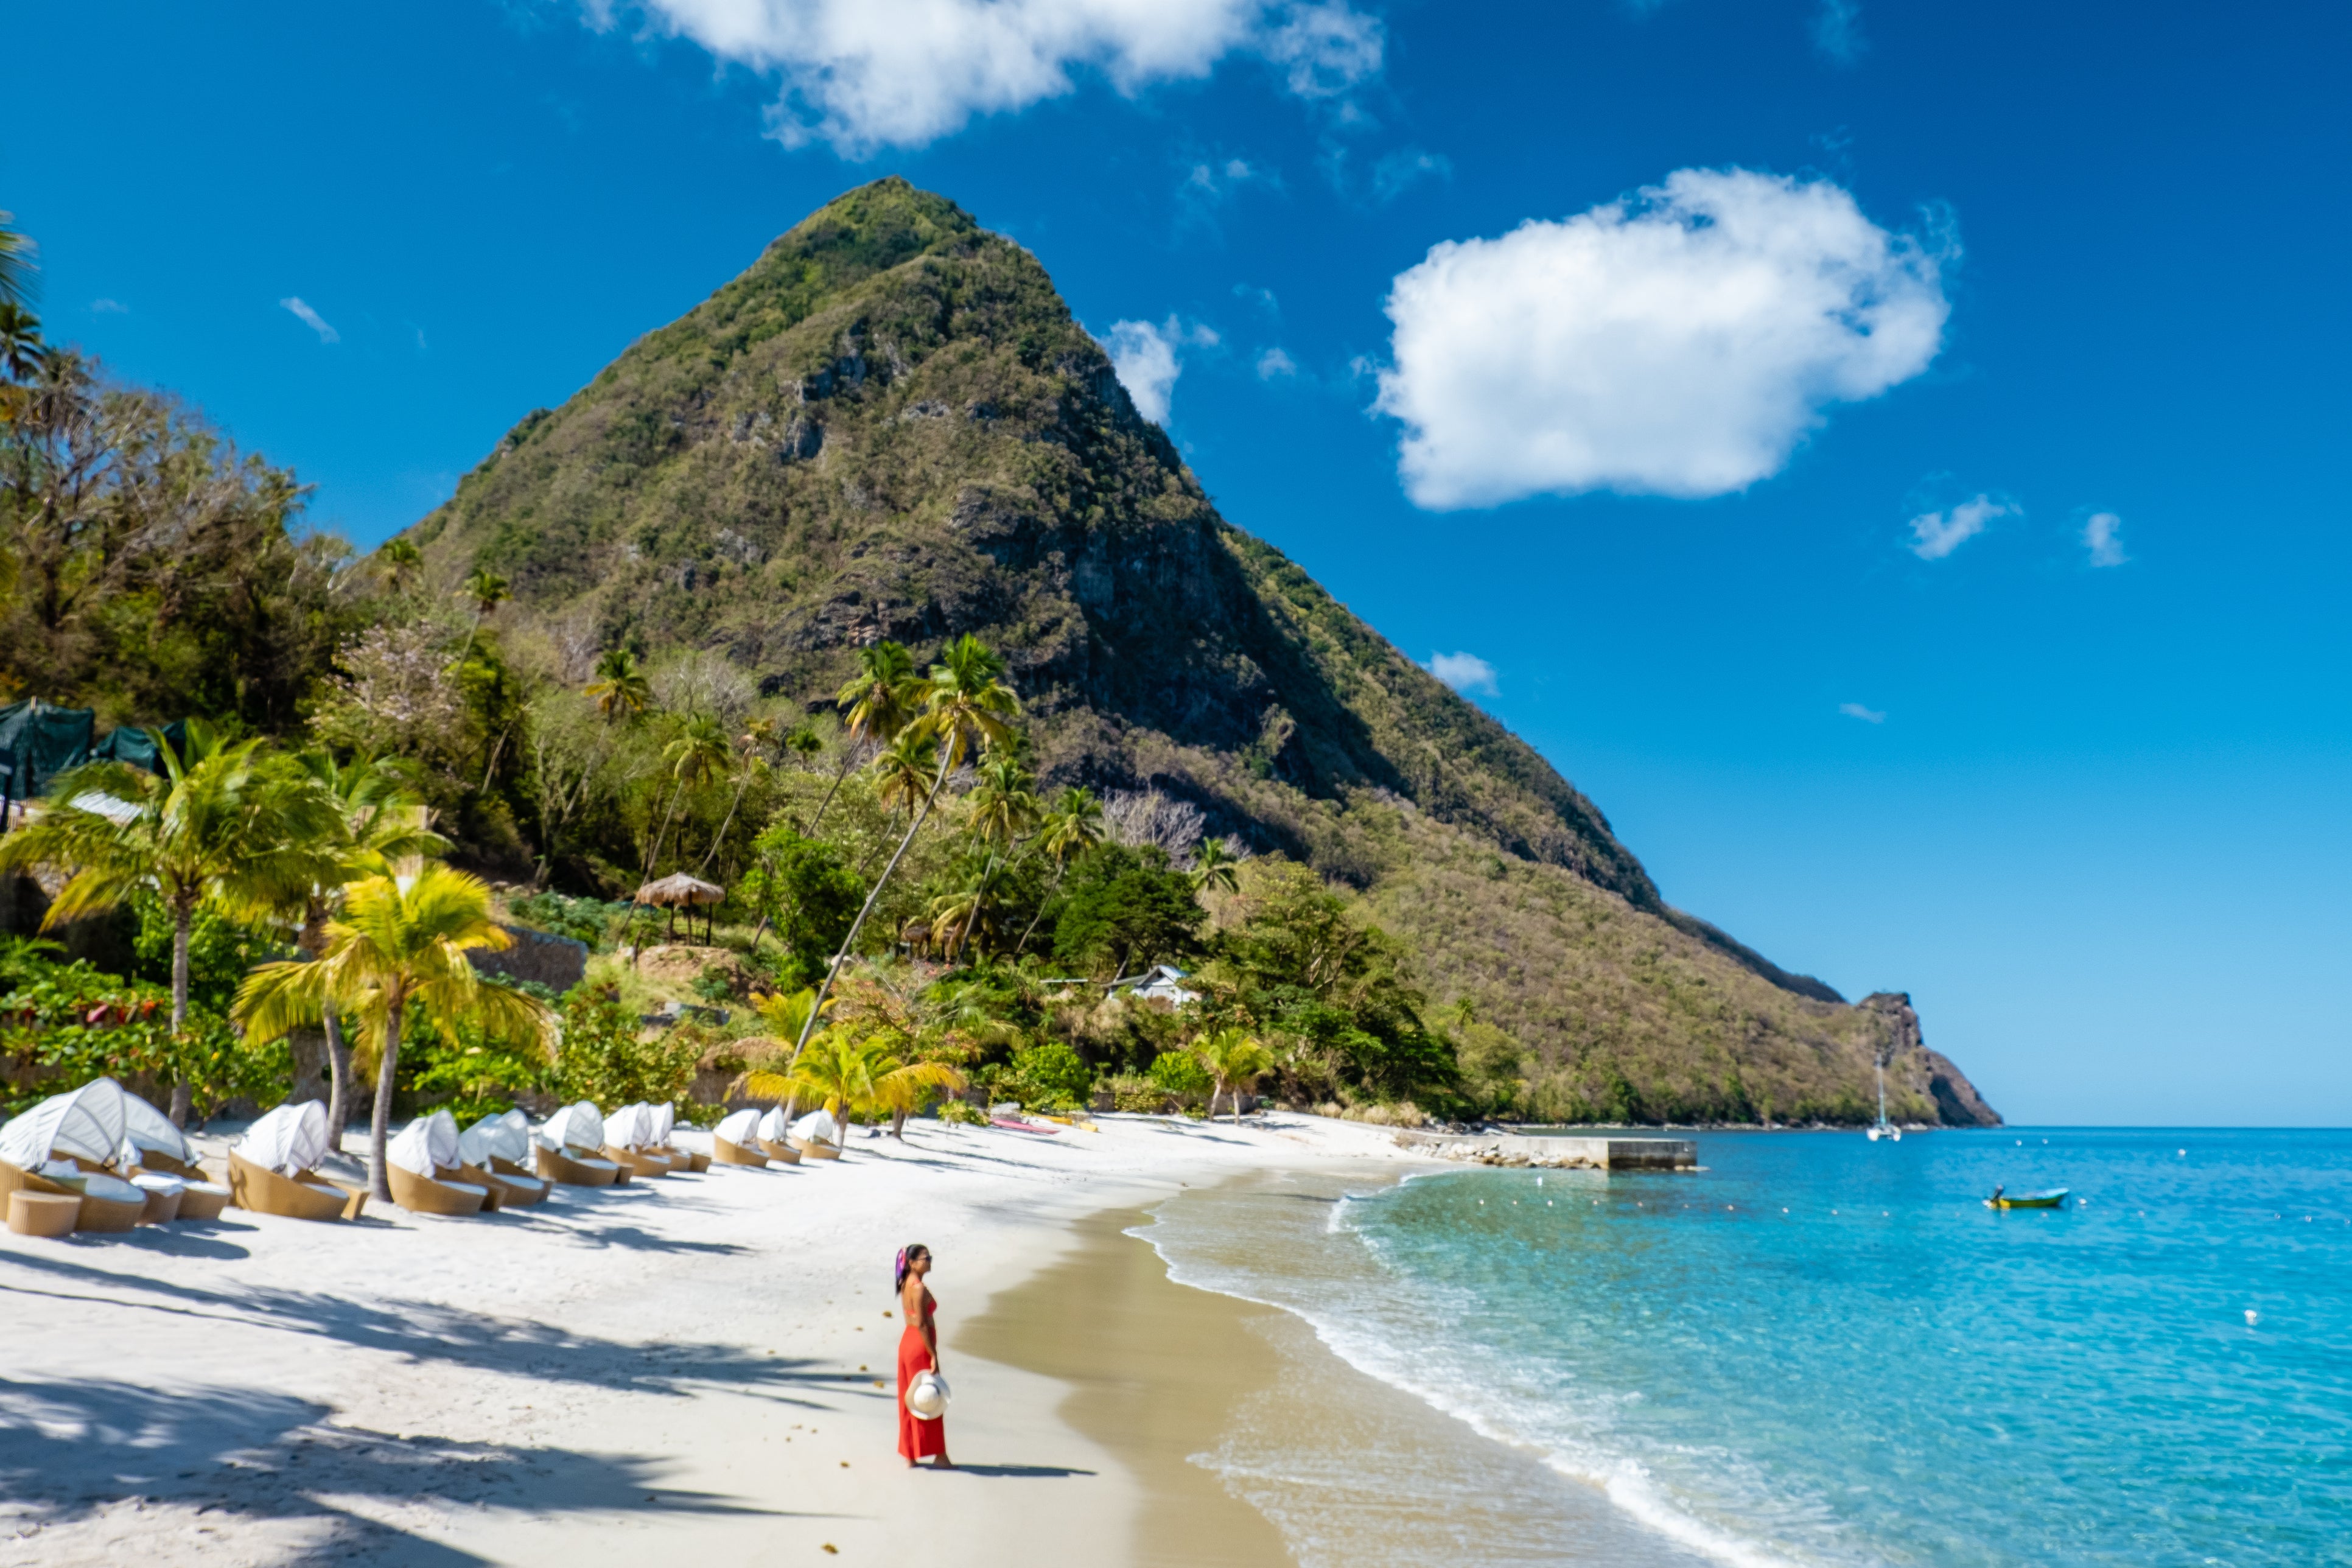 Escape the February blues with a trip to the Caribbean